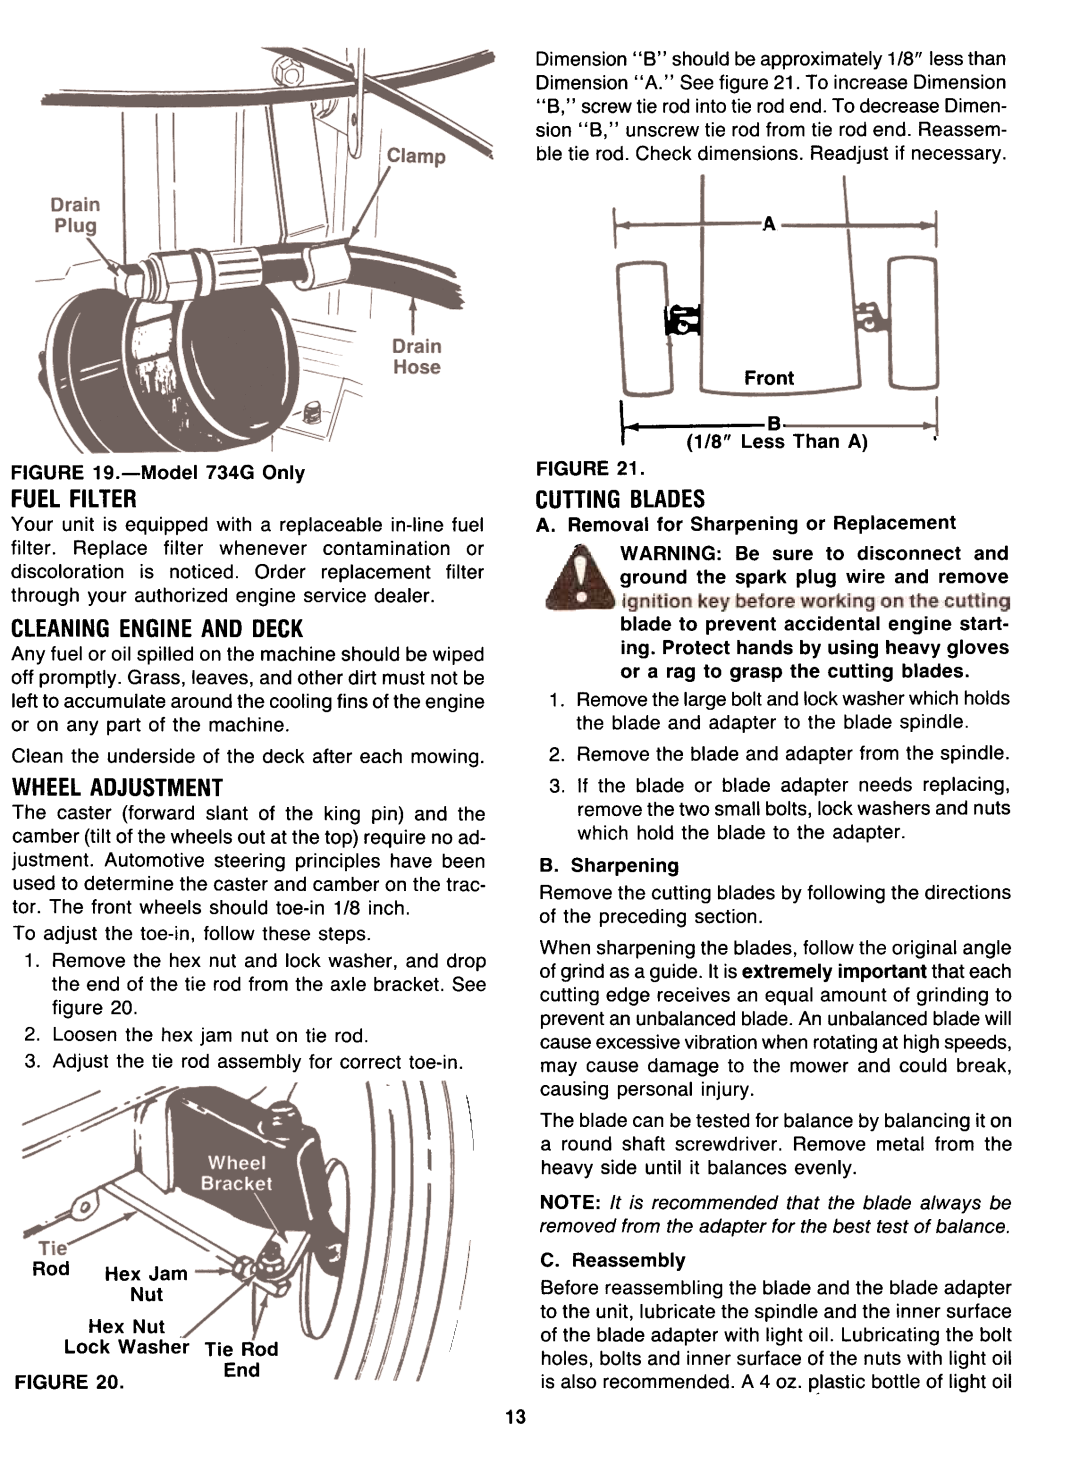 Yard-Man 131704F Fuelfilter, Cuttingbladesa, Cleaningengineand Deck, Wheel Adjustment, Front, Reassembly, Nut Hex Nut 